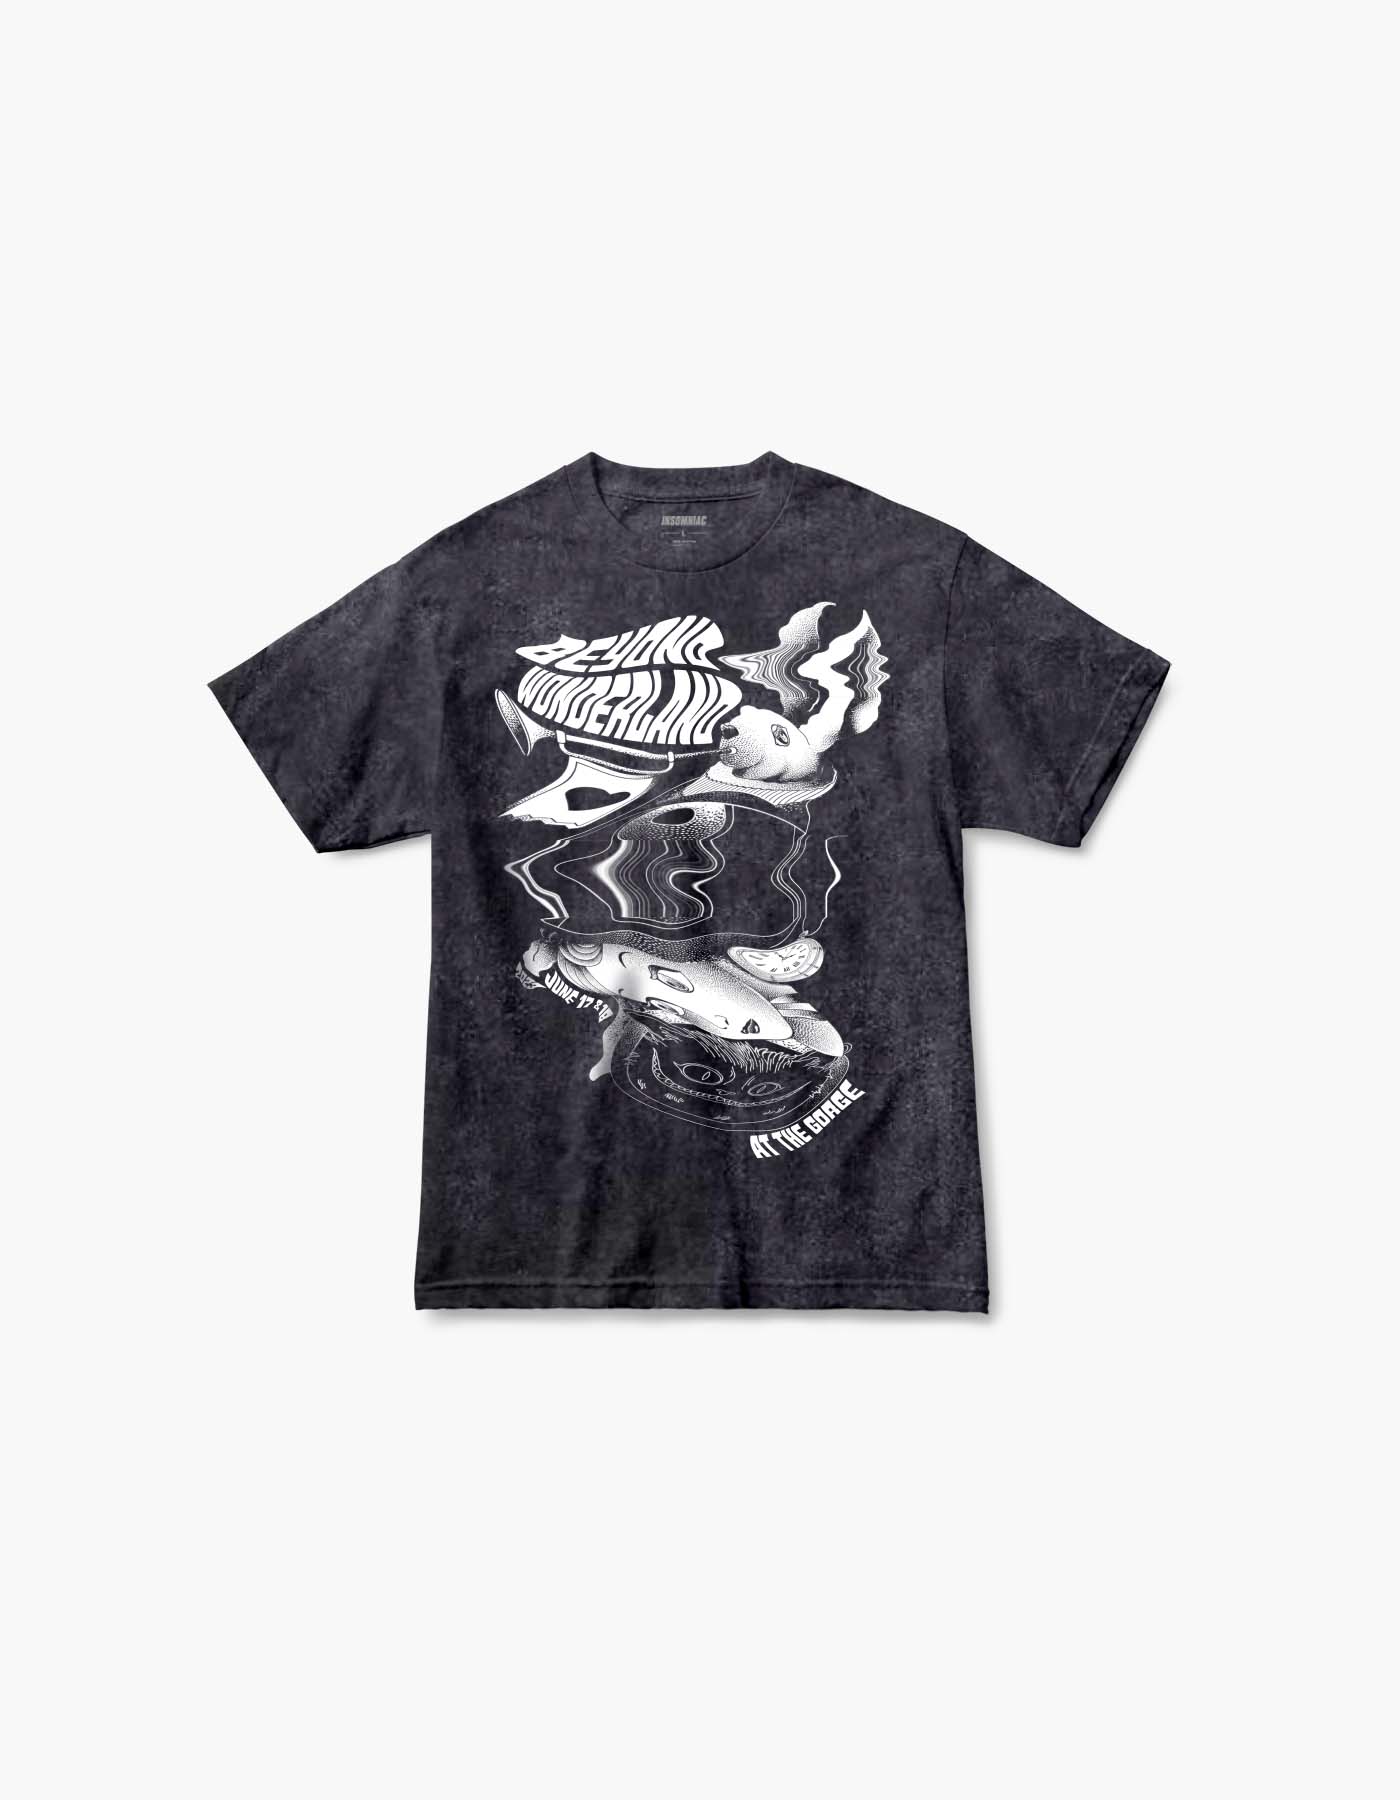 Storybook Lineup Washed S/S Tee